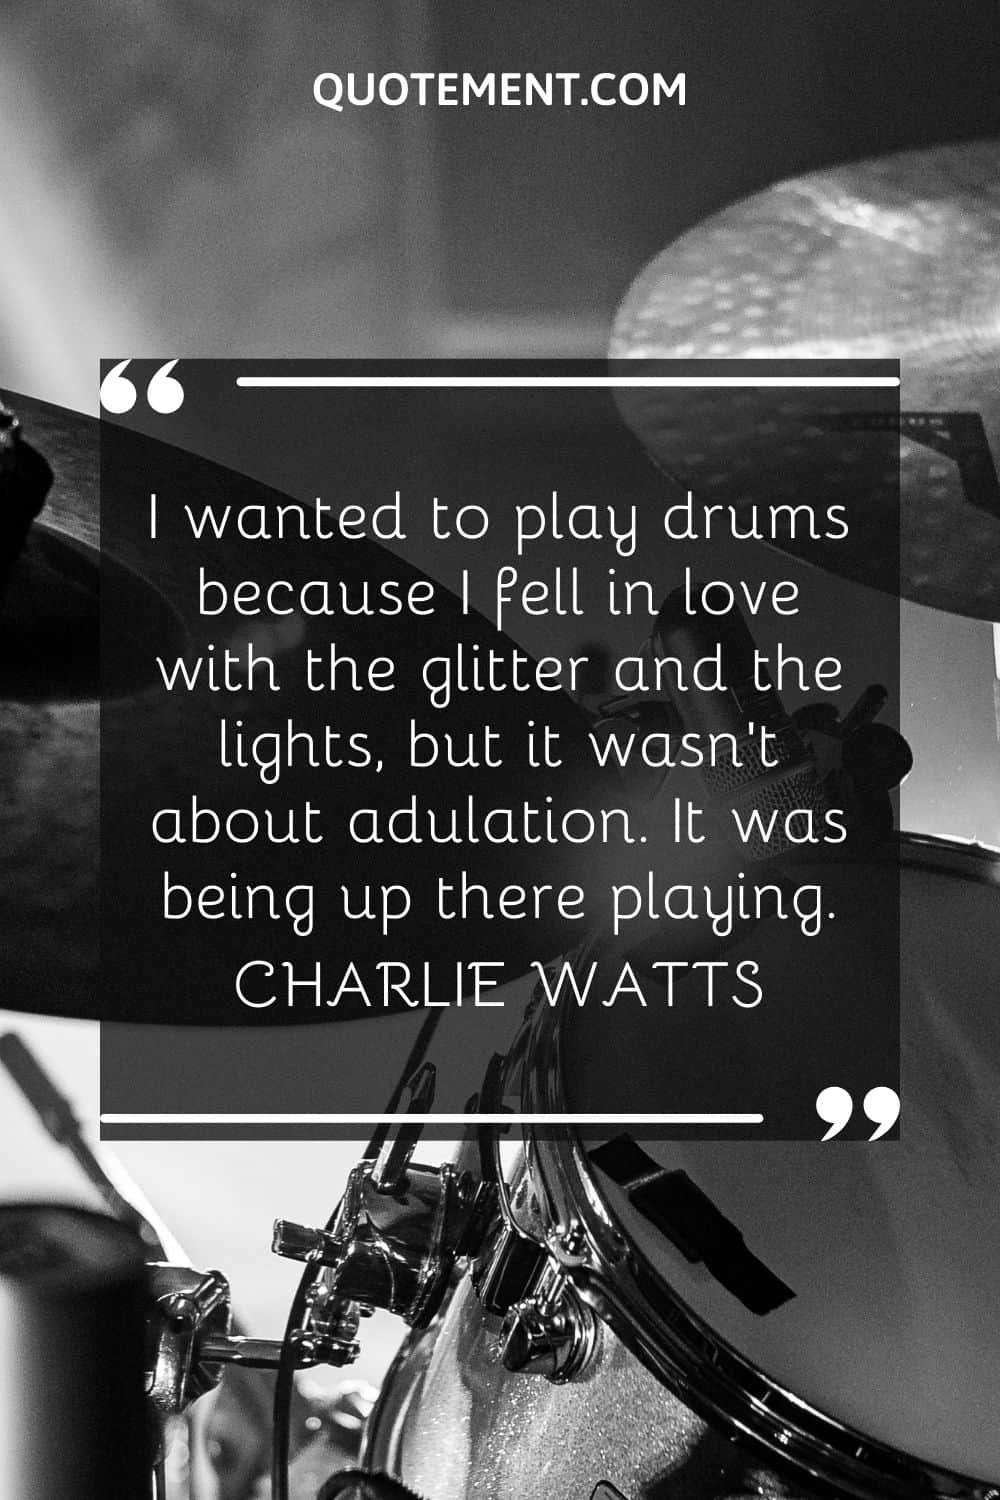 I wanted to play drums because I fell in love with the glitter and the lights, but it wasn't about adulation. It was being up there playing